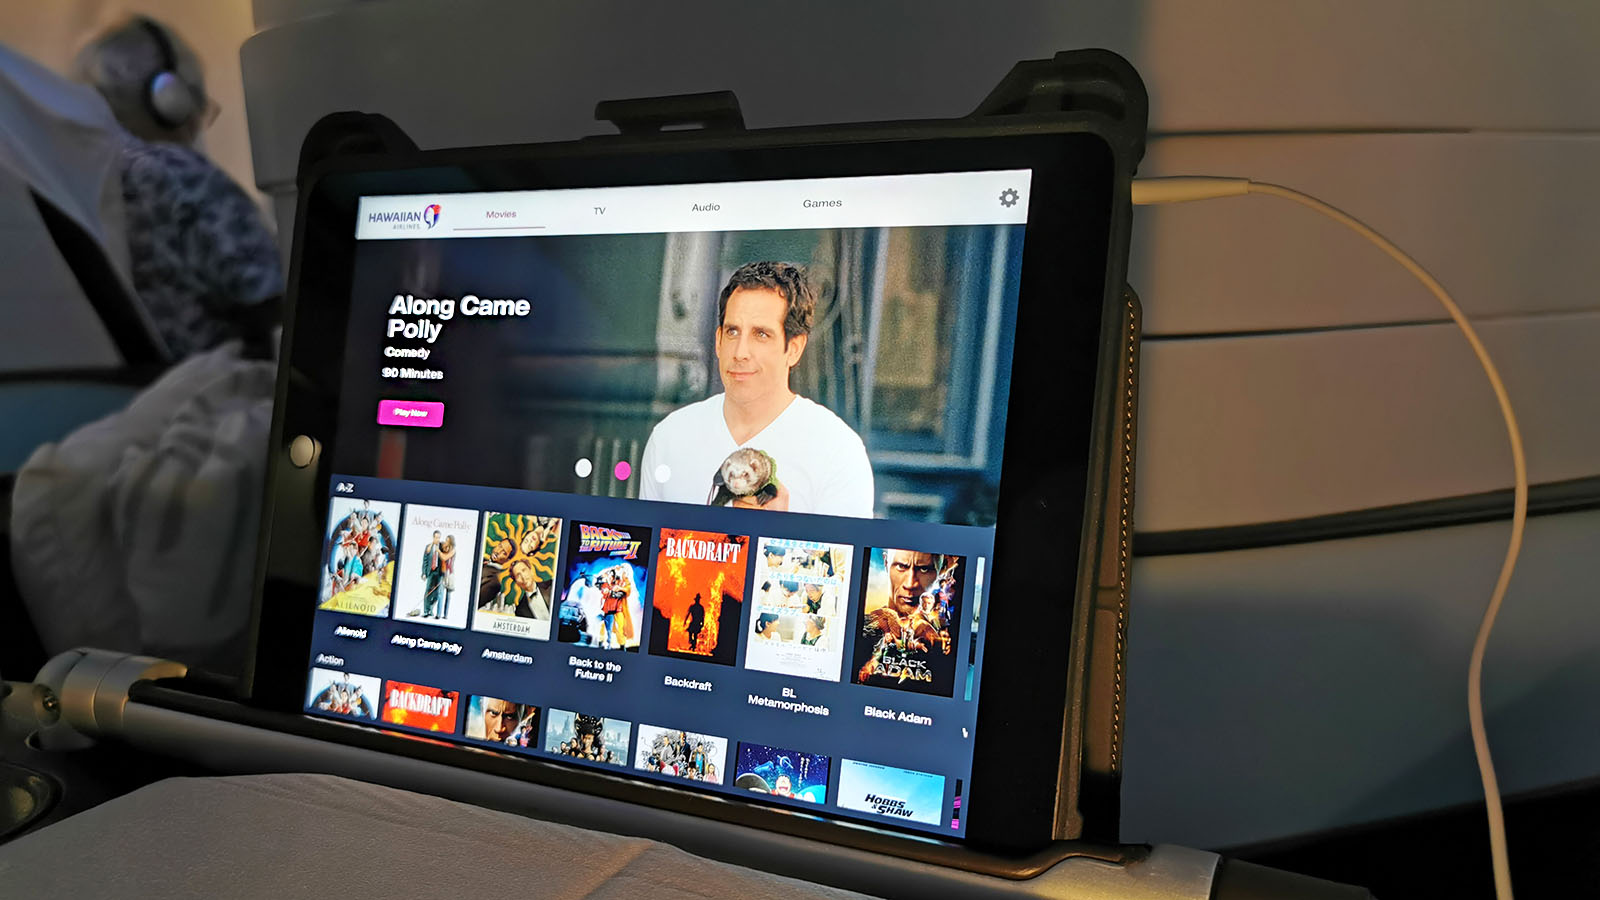 iPad in Hawaiian Airlines Airbus A330 Business Class